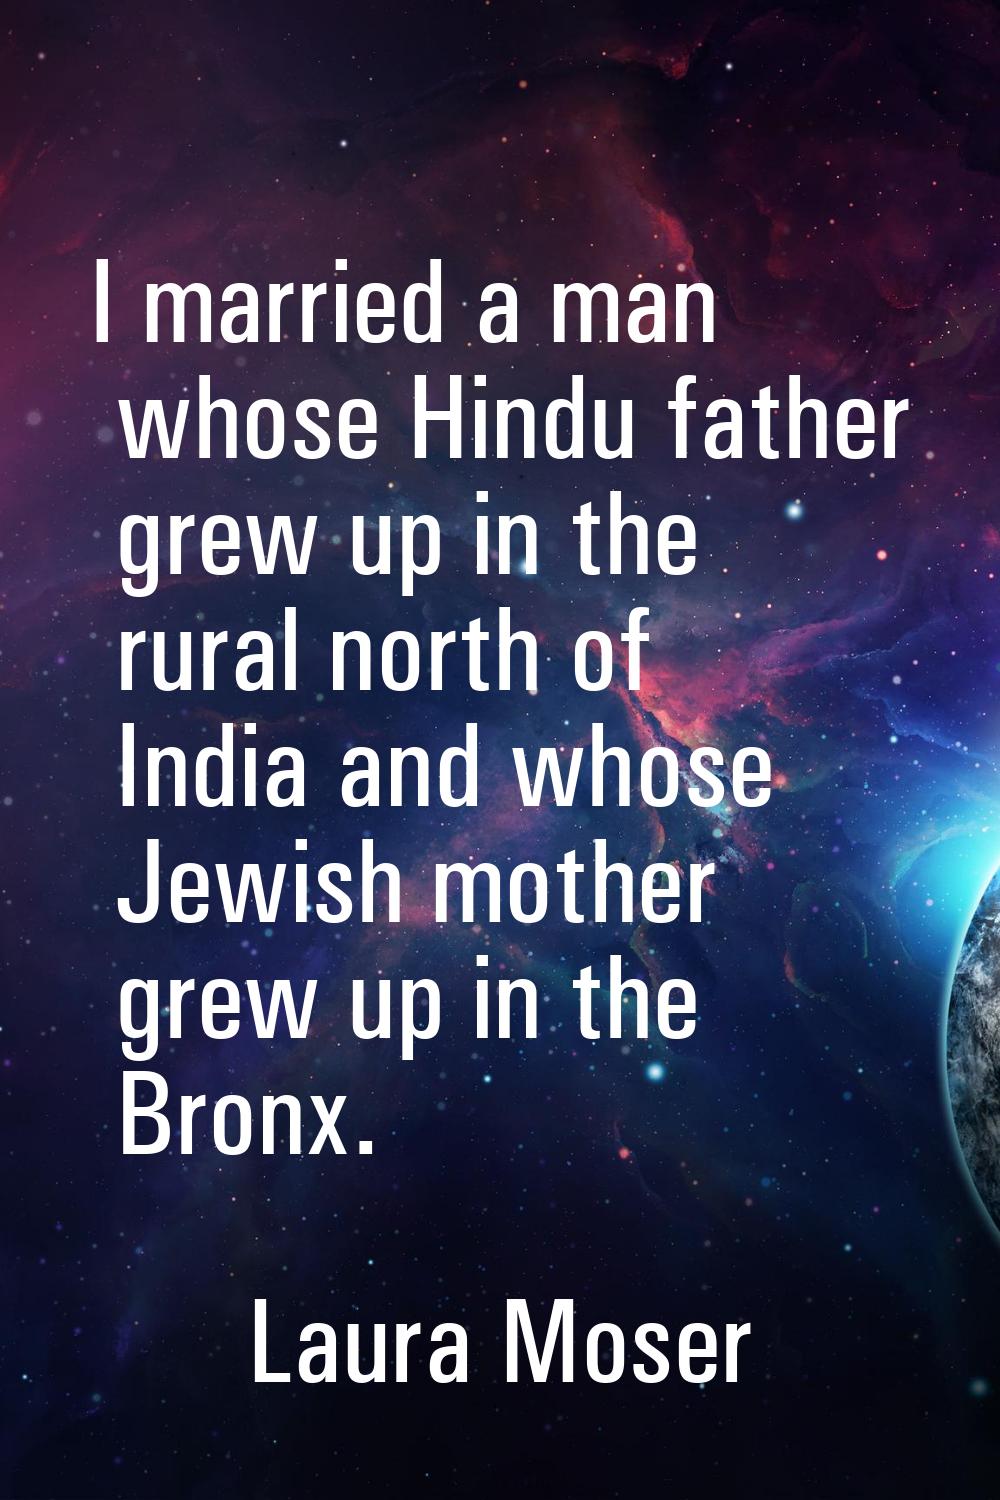 I married a man whose Hindu father grew up in the rural north of India and whose Jewish mother grew